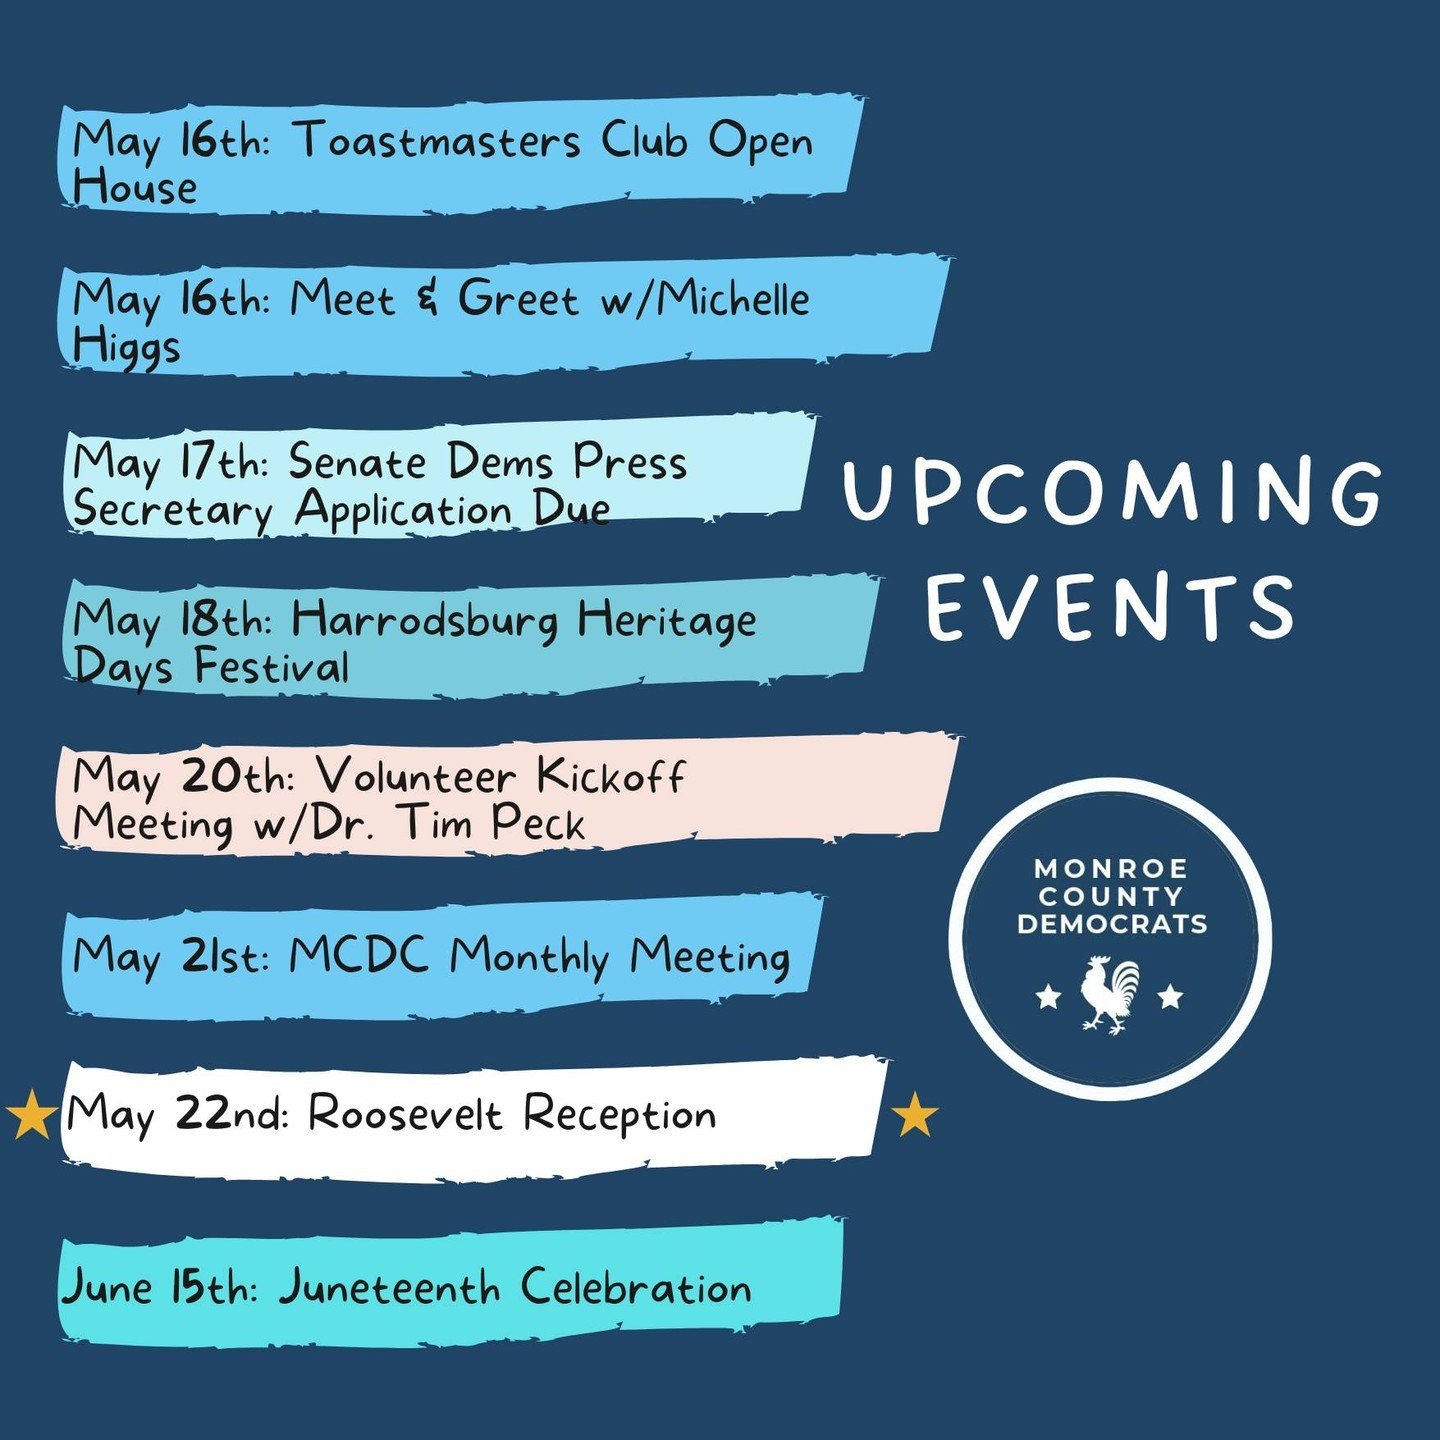 Blue Revue: Six Days Until Roosevelt Reception!, MCDC Monthly Meeting, Candidate Events, and Much More!